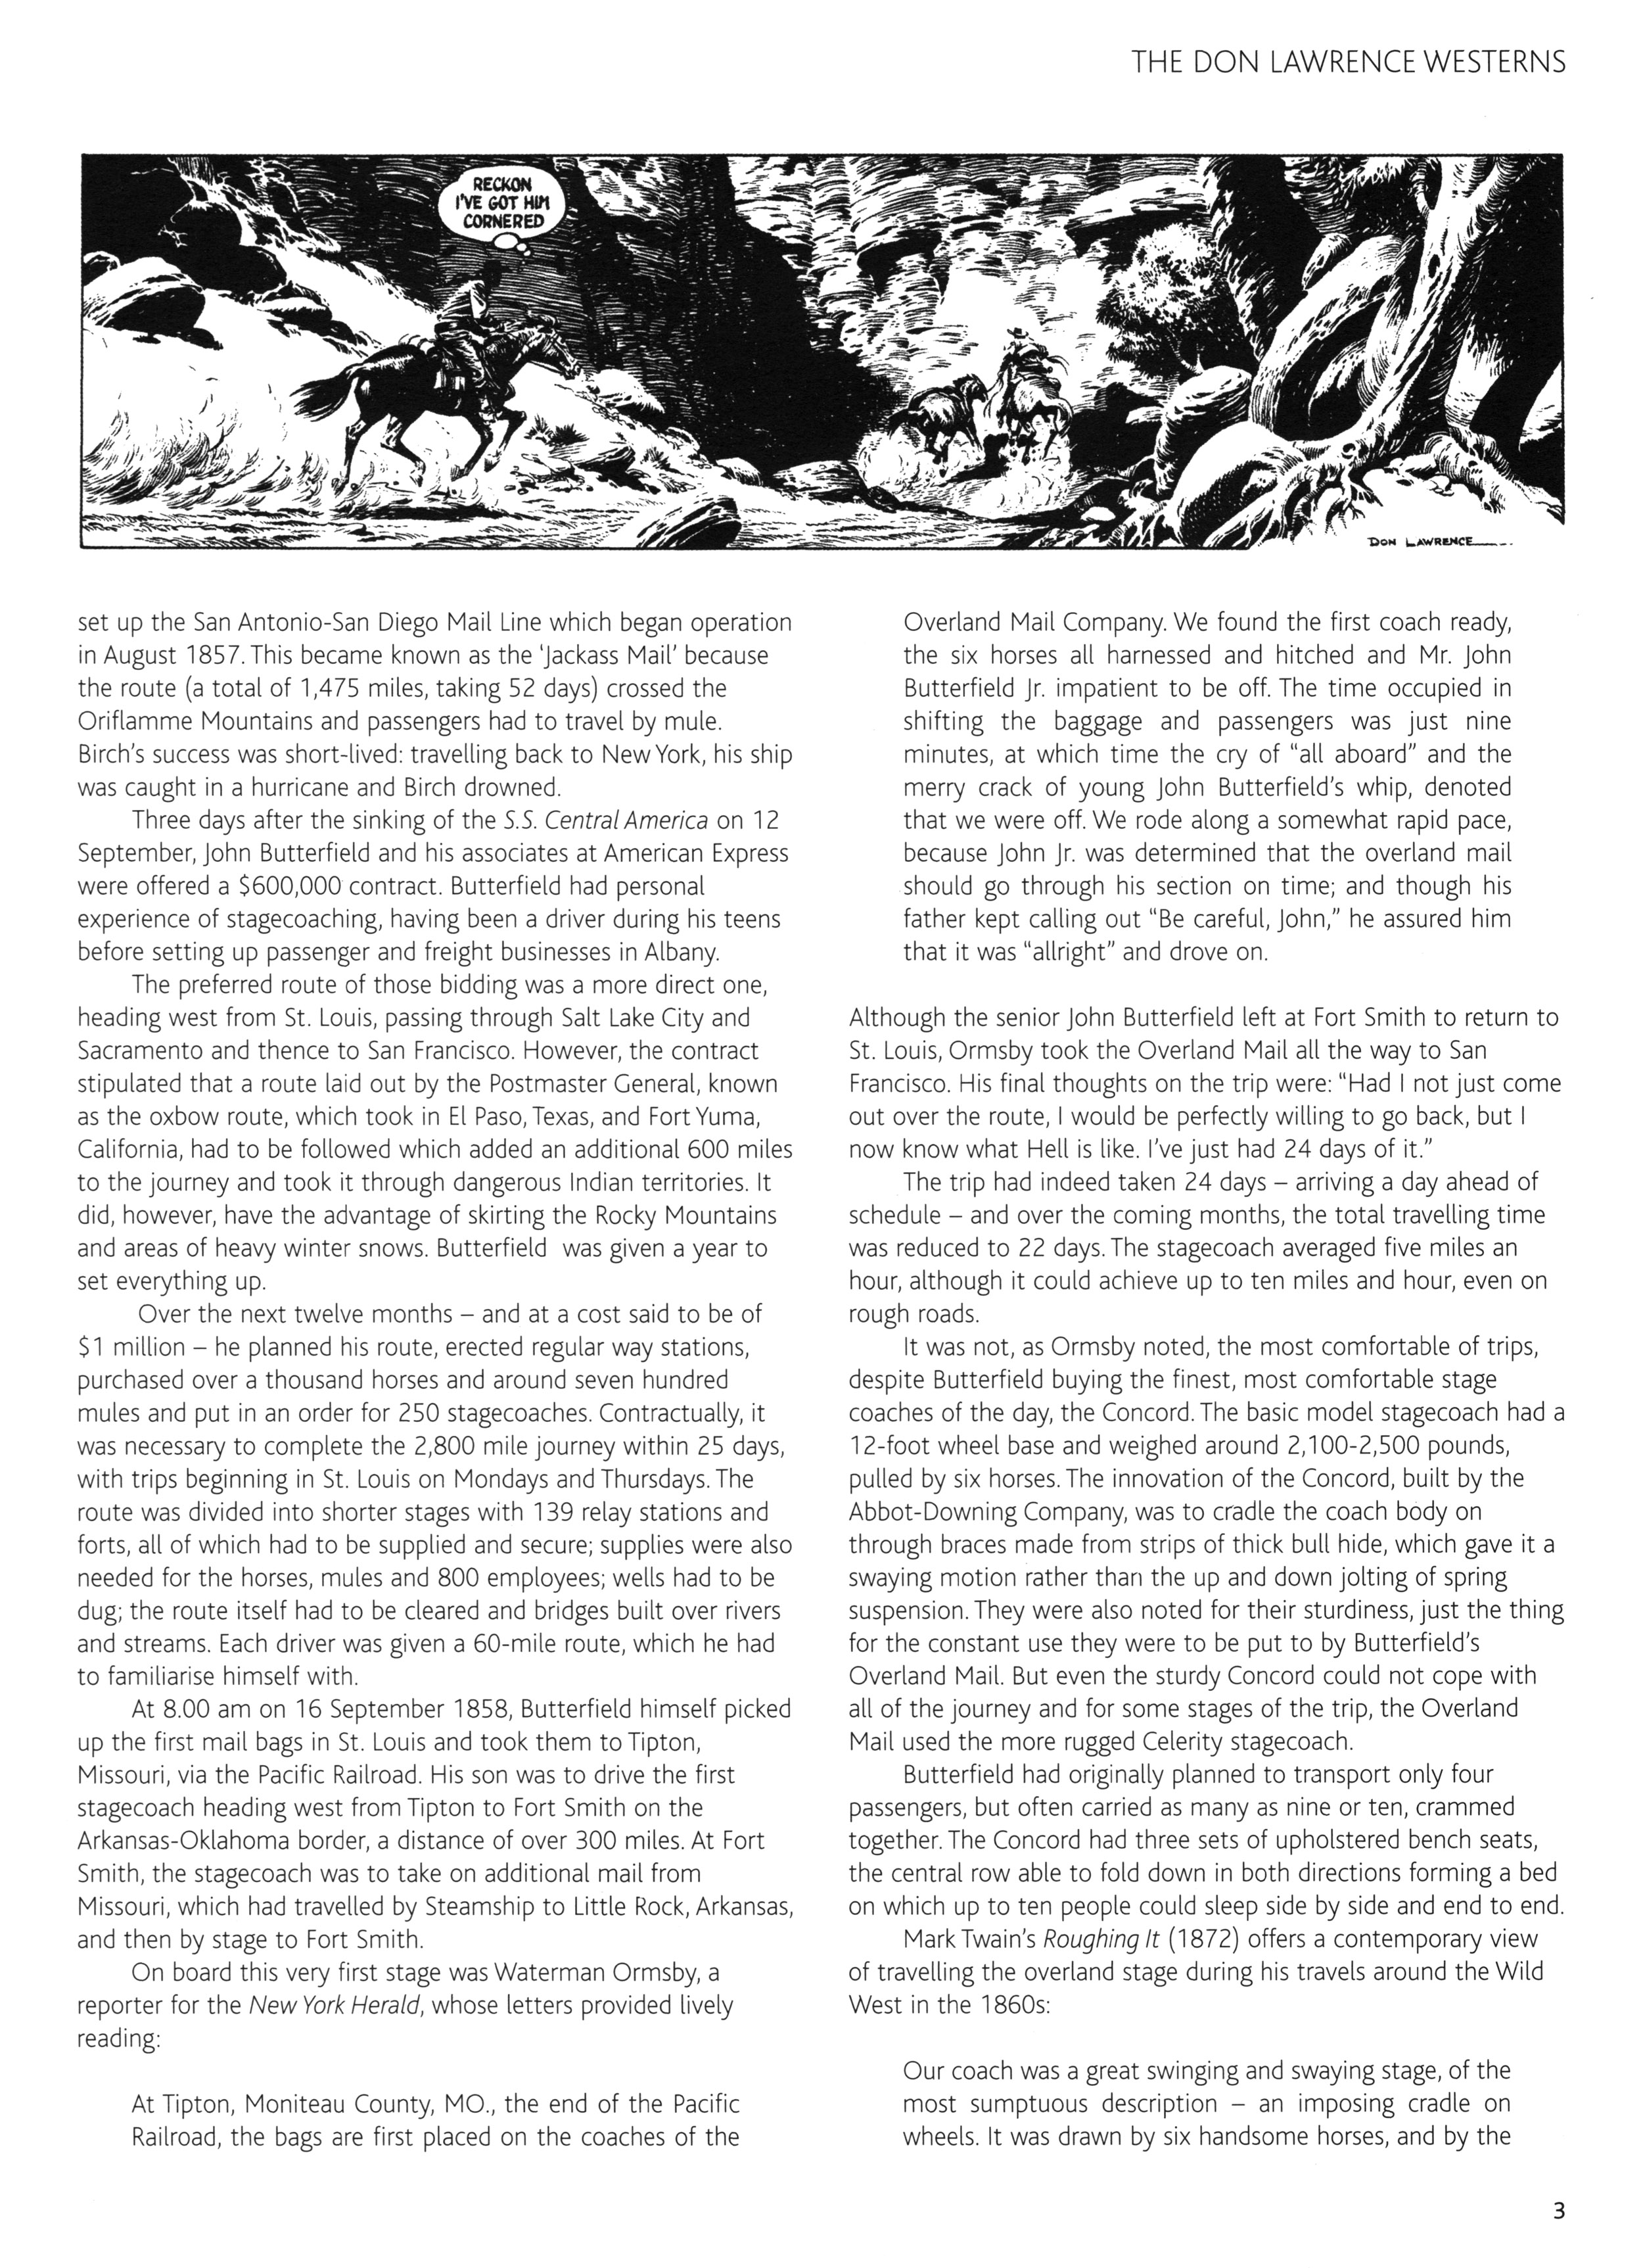 Read online Don Lawrence Westerns comic -  Issue # TPB (Part 1) - 7